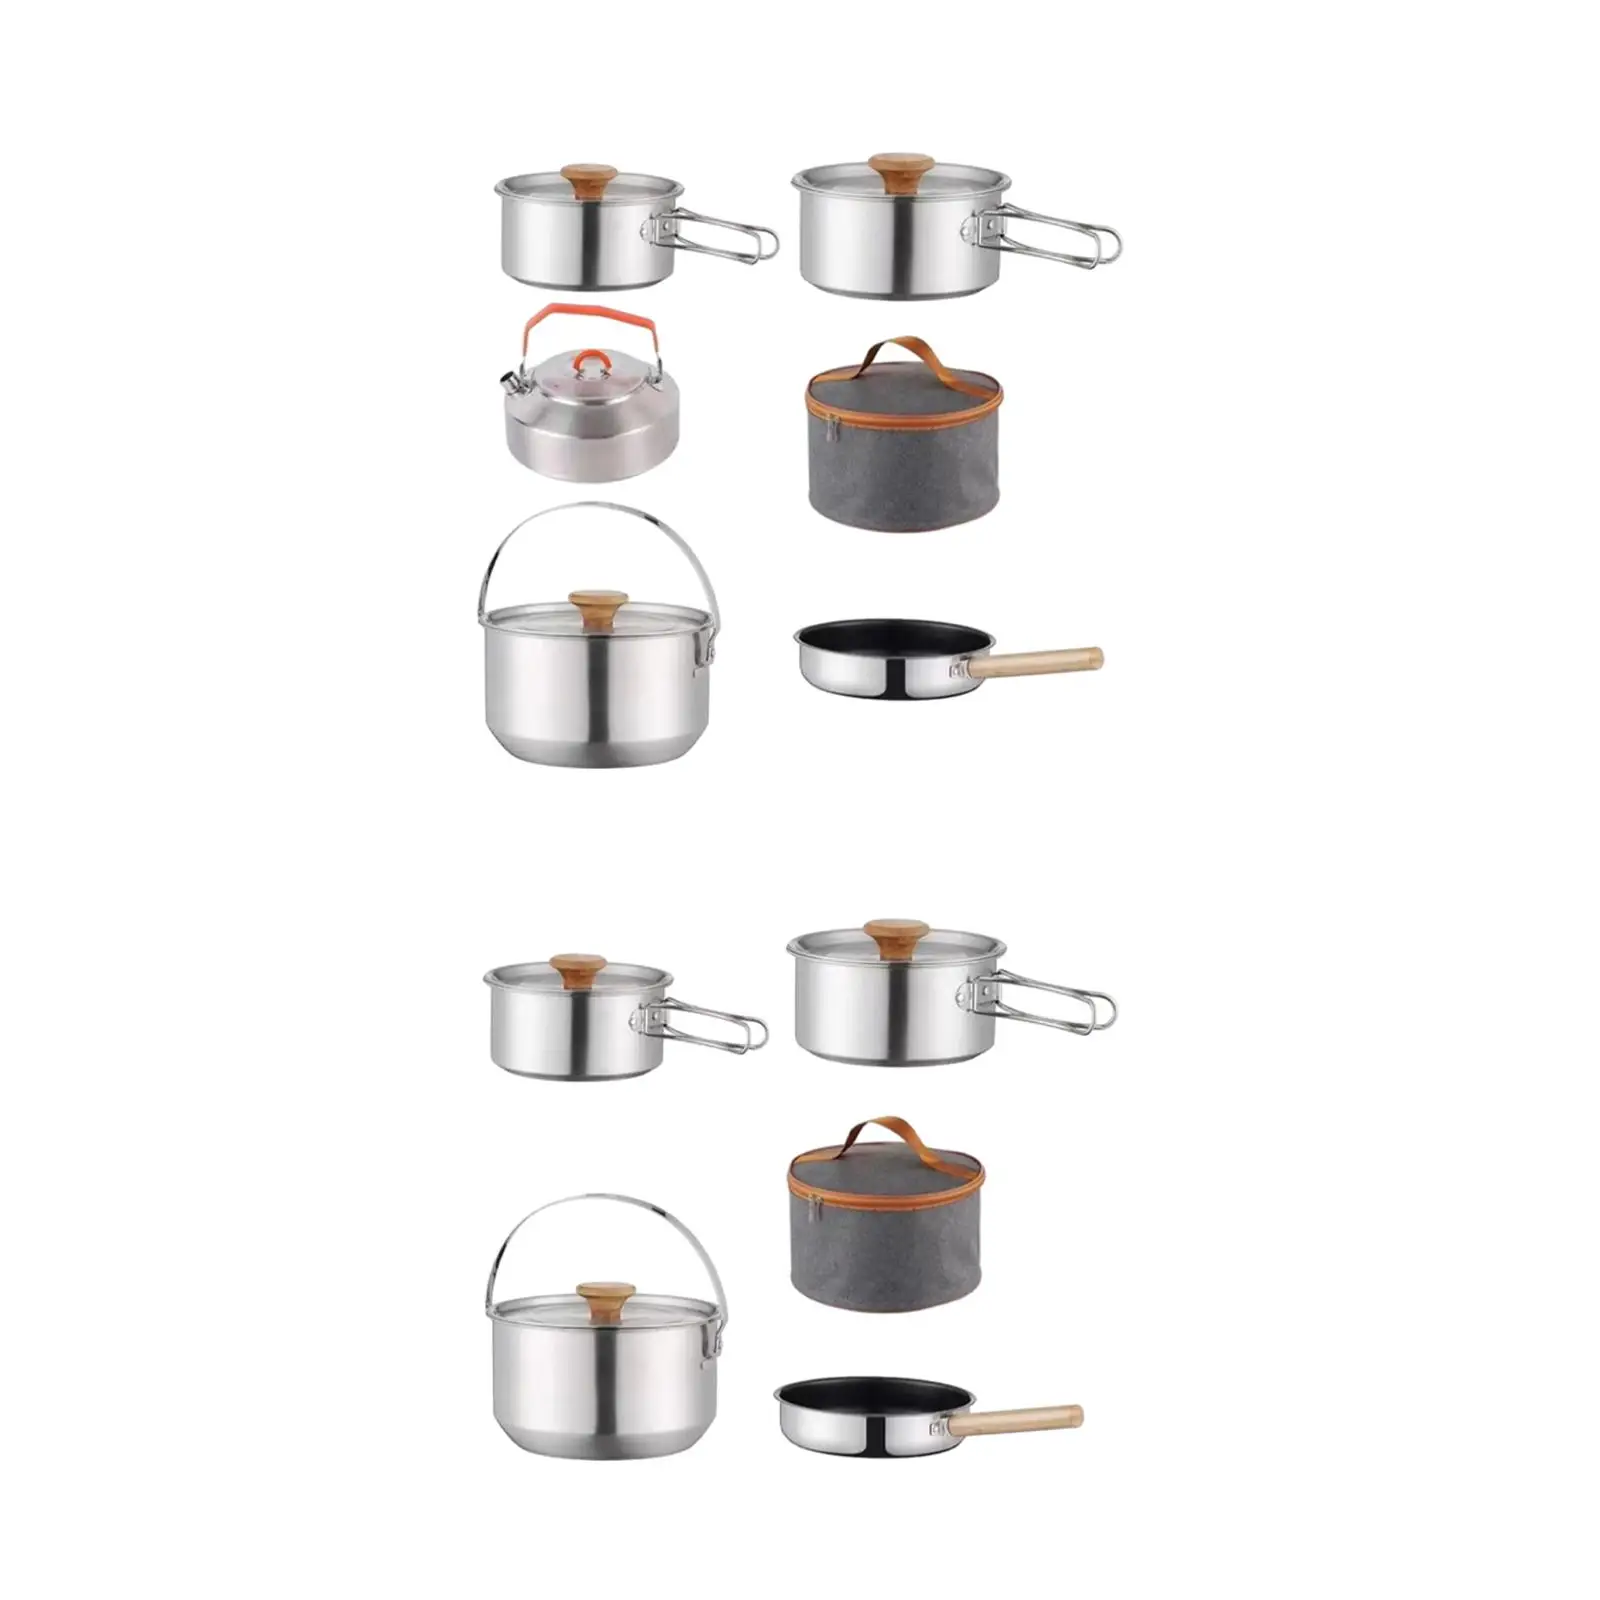 Camping Cookware Kit Cooking Set Nonstick with Storage Bag Utensils Outdoor Pot Cookset for Fishing Picnic Survival Dinner